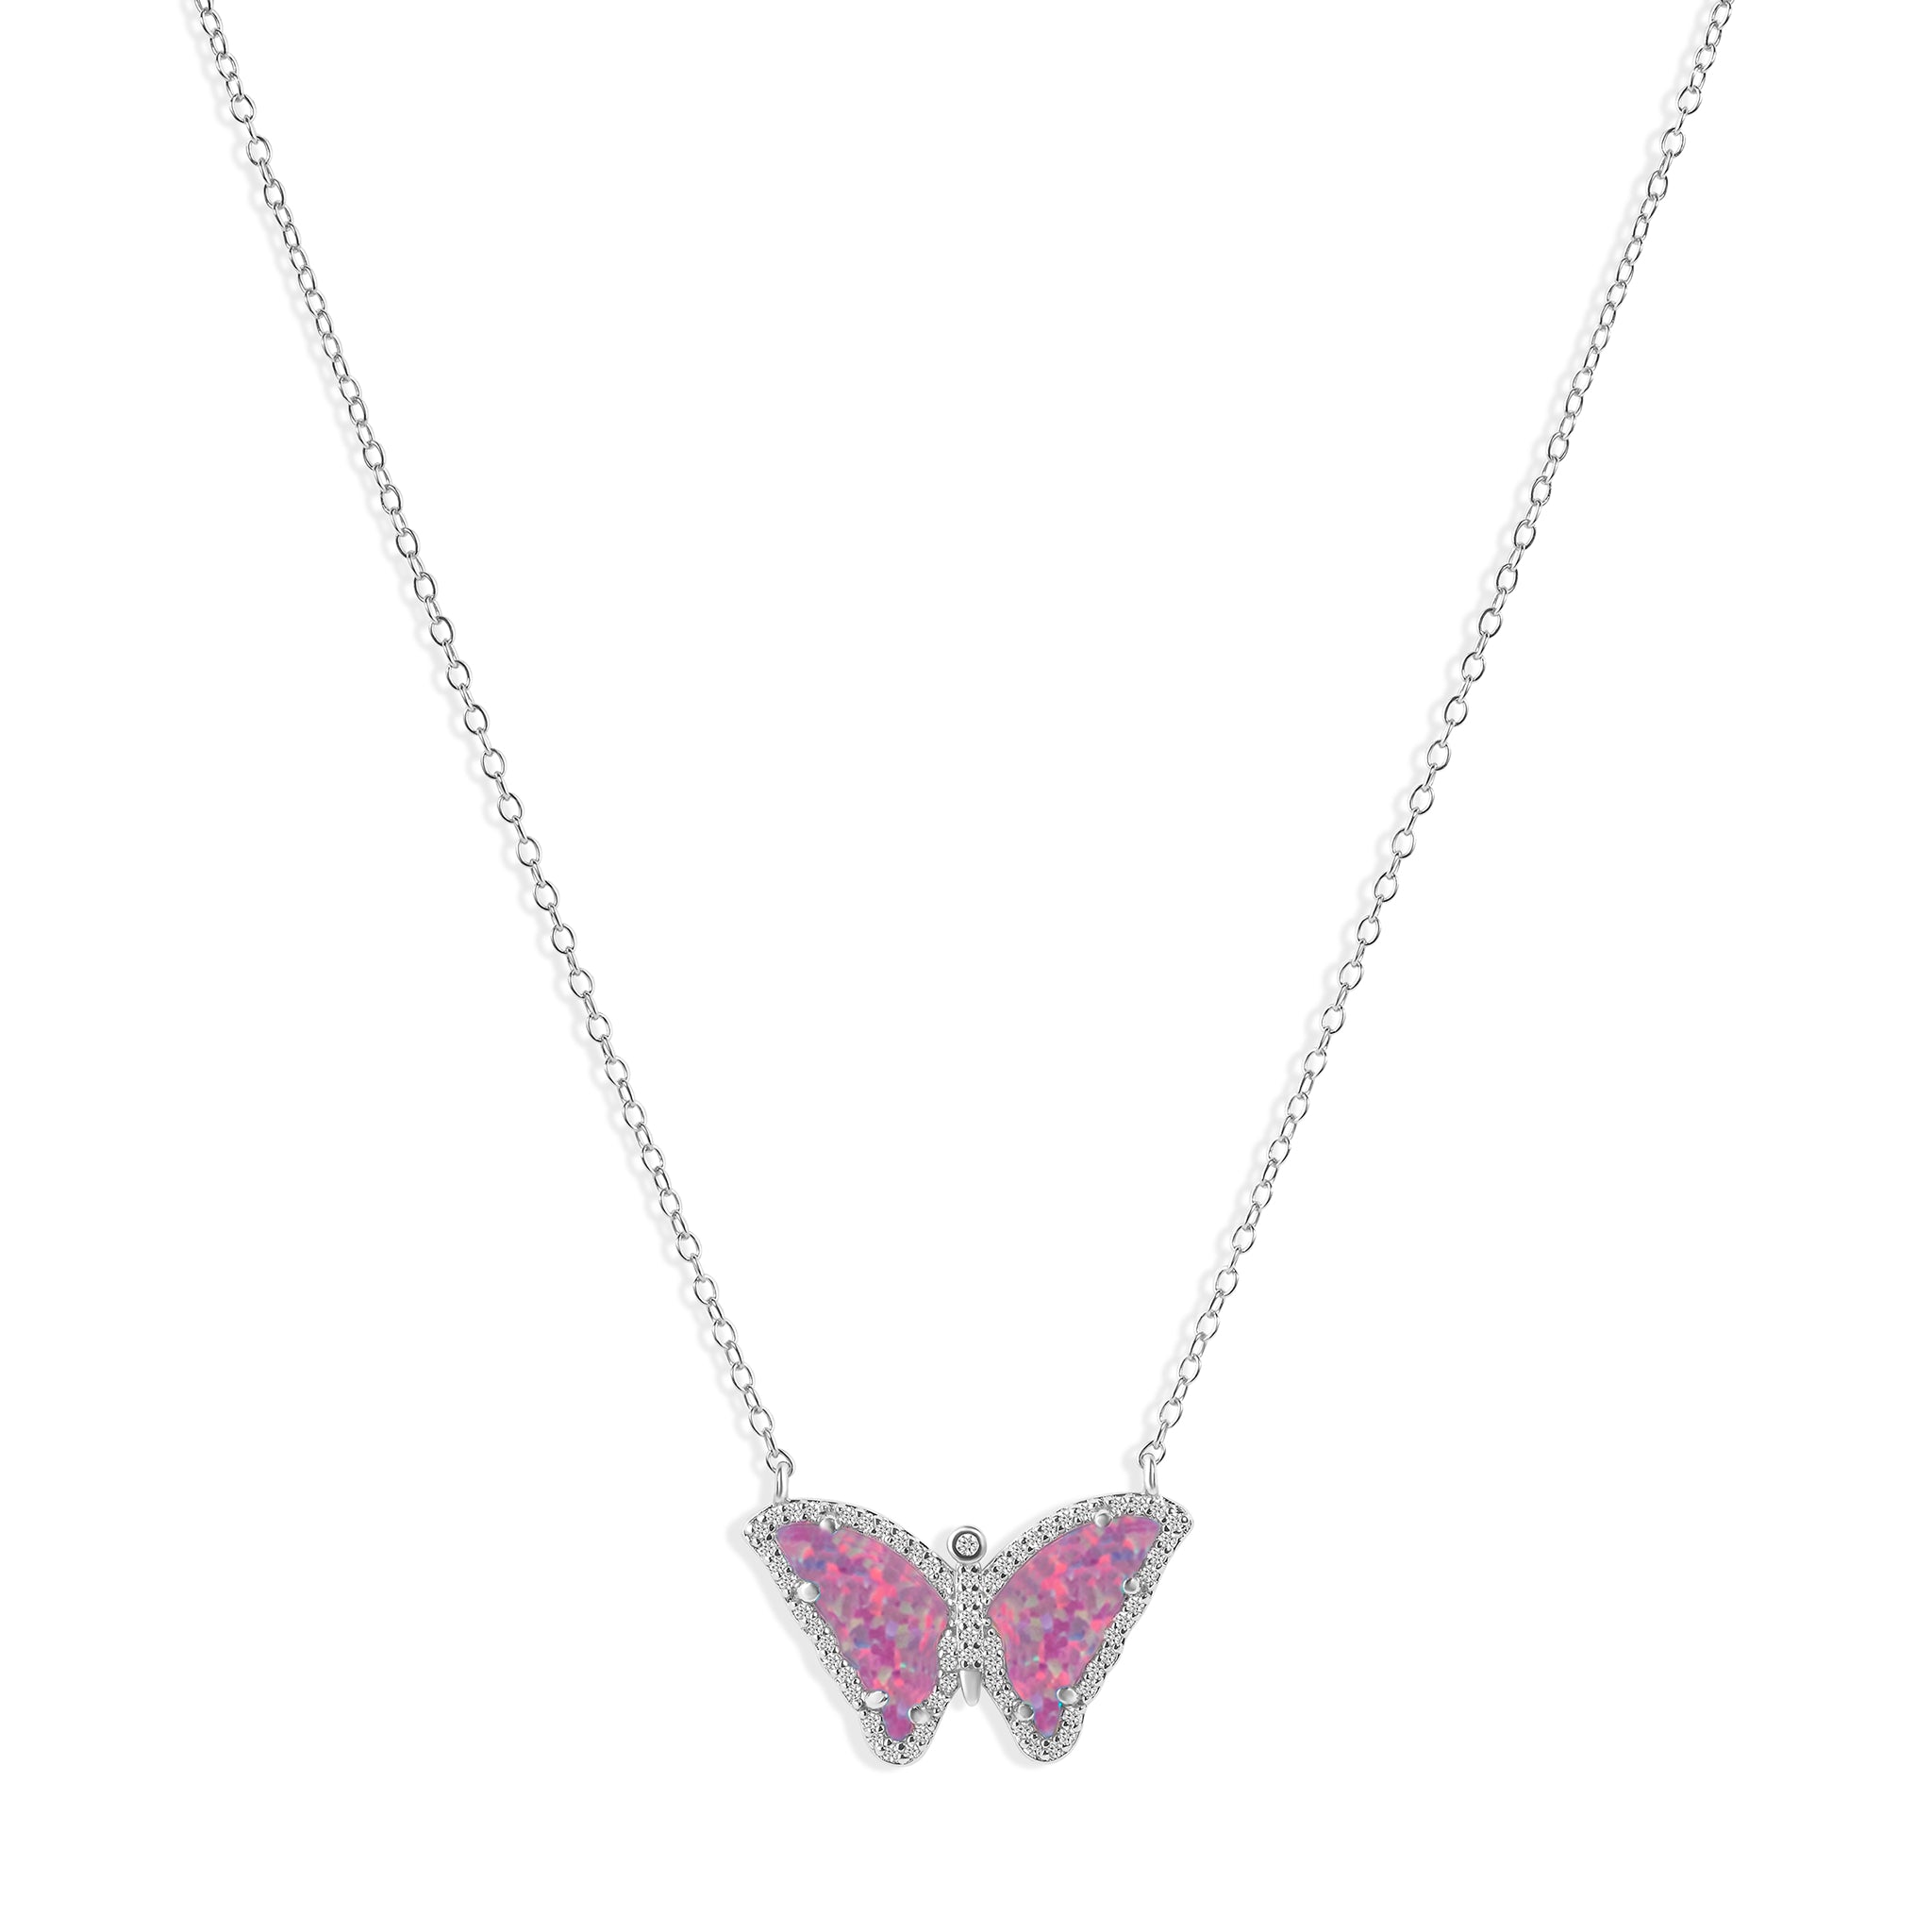 Isabella Classic Butterfly Necklace N315 in Sterling Silver